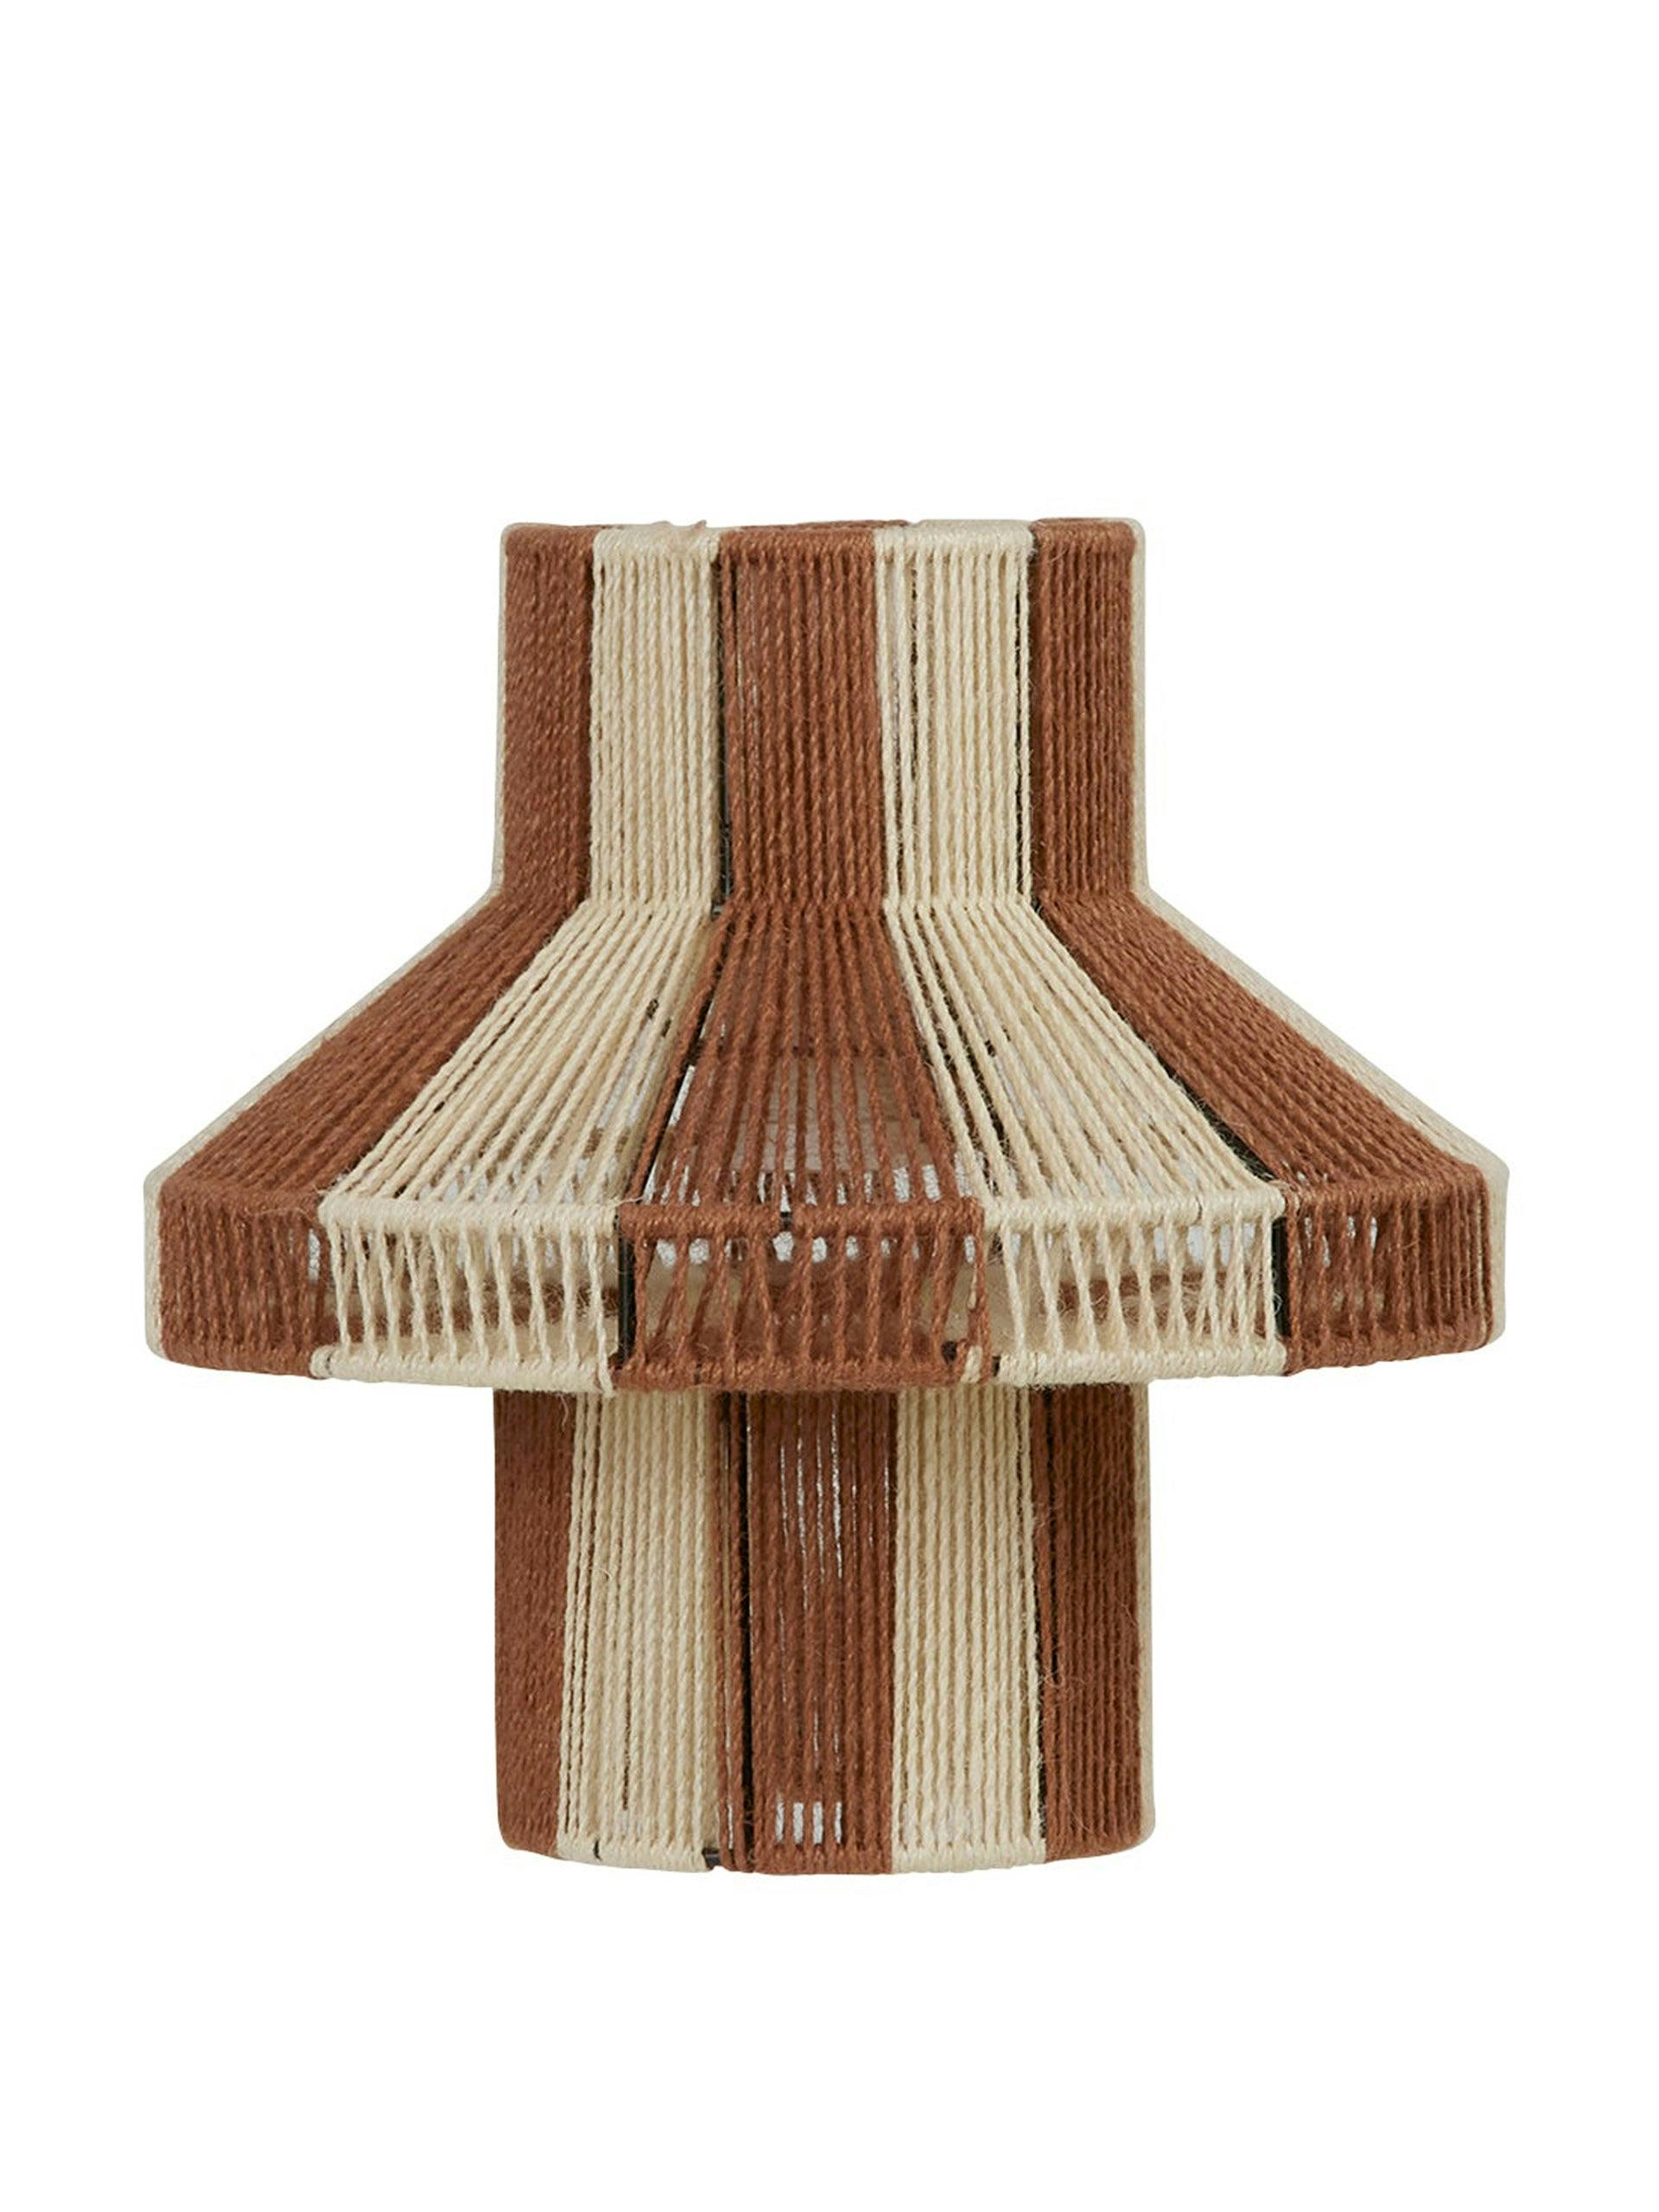 Brown striped lamp shade